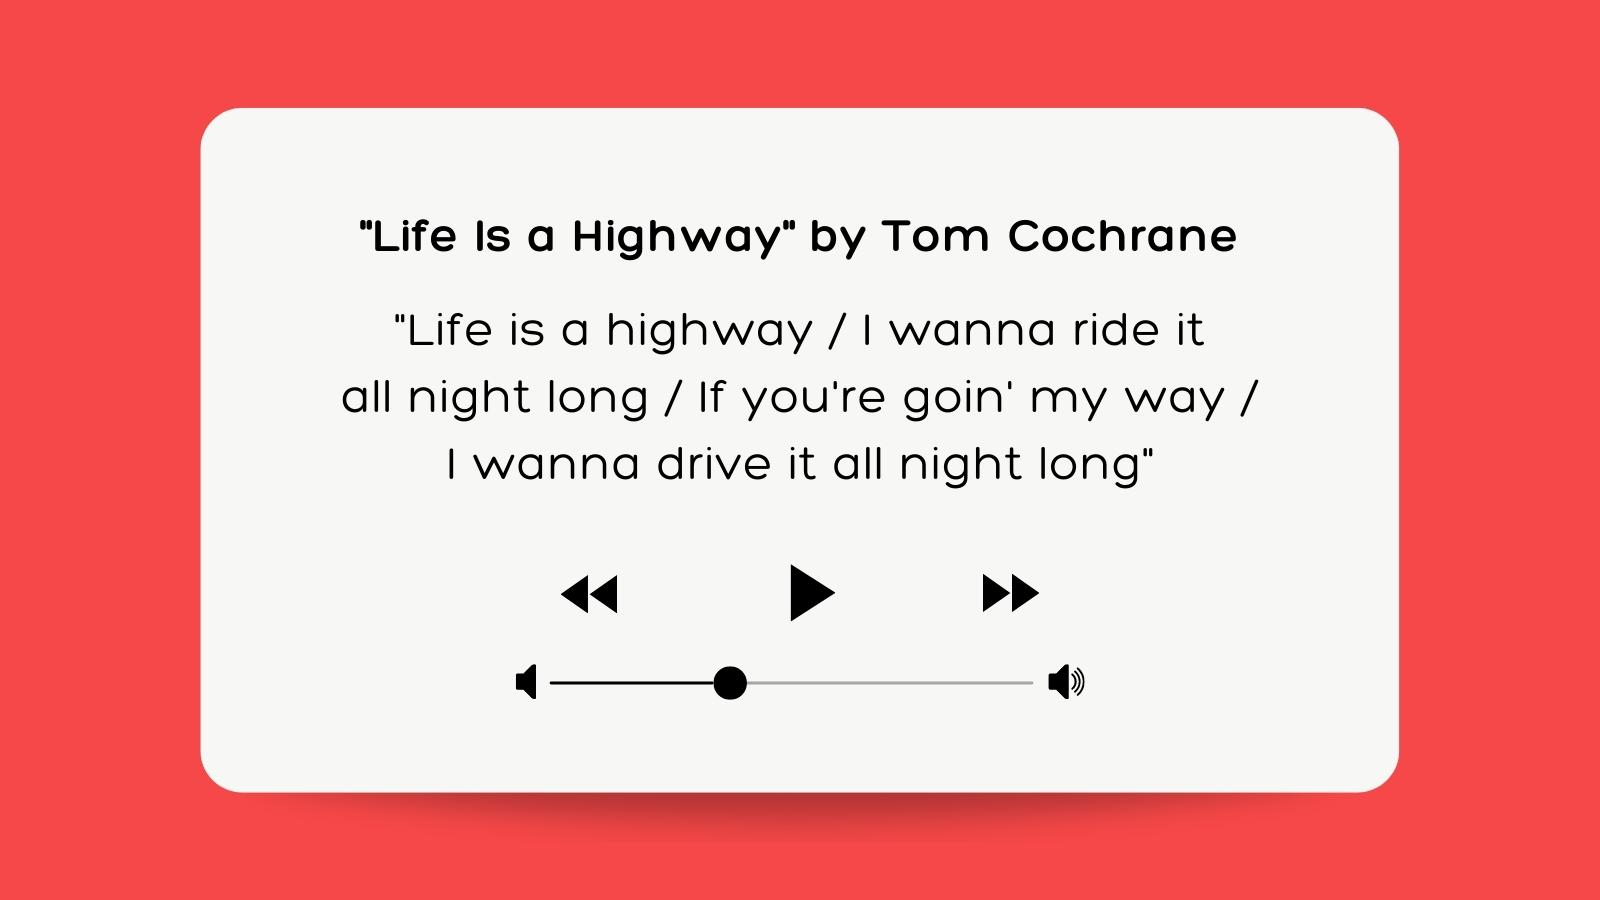 Life Is a Highway by Tom Cochrane.